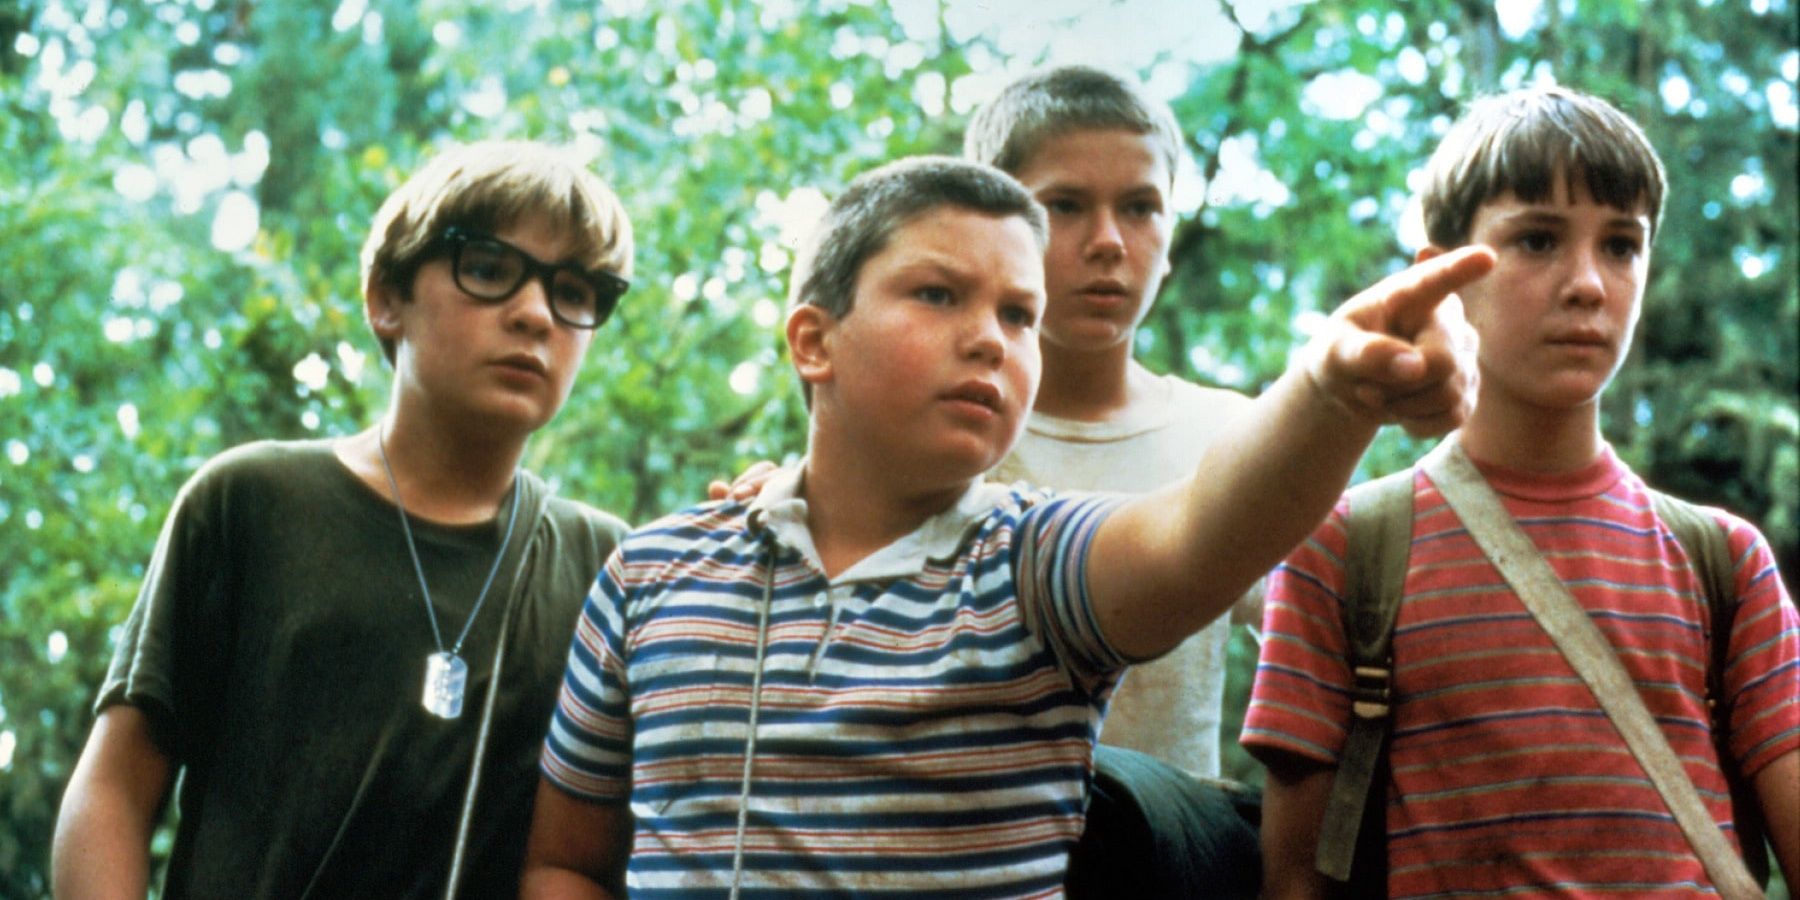 The cast of Stand By Me